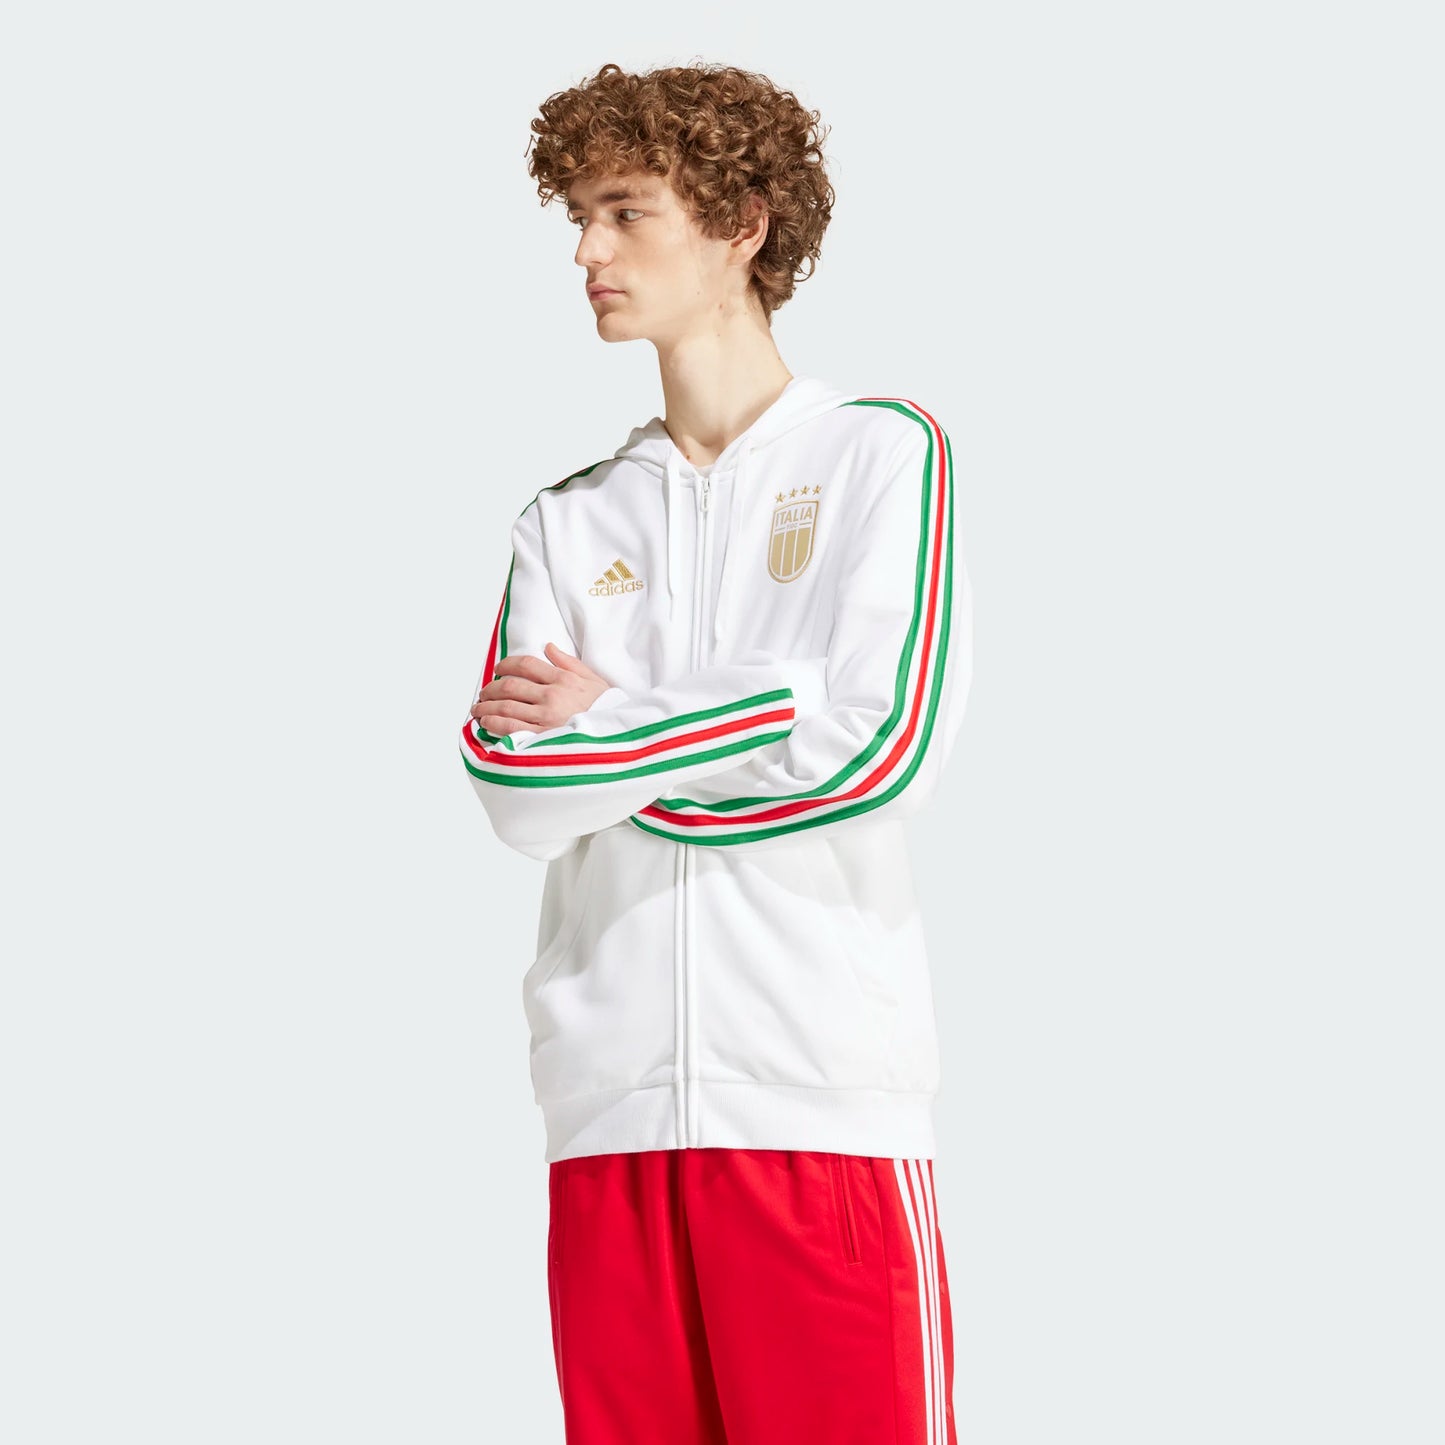 Adidas-H-Veste with entirely zipped hooding Italy DNA